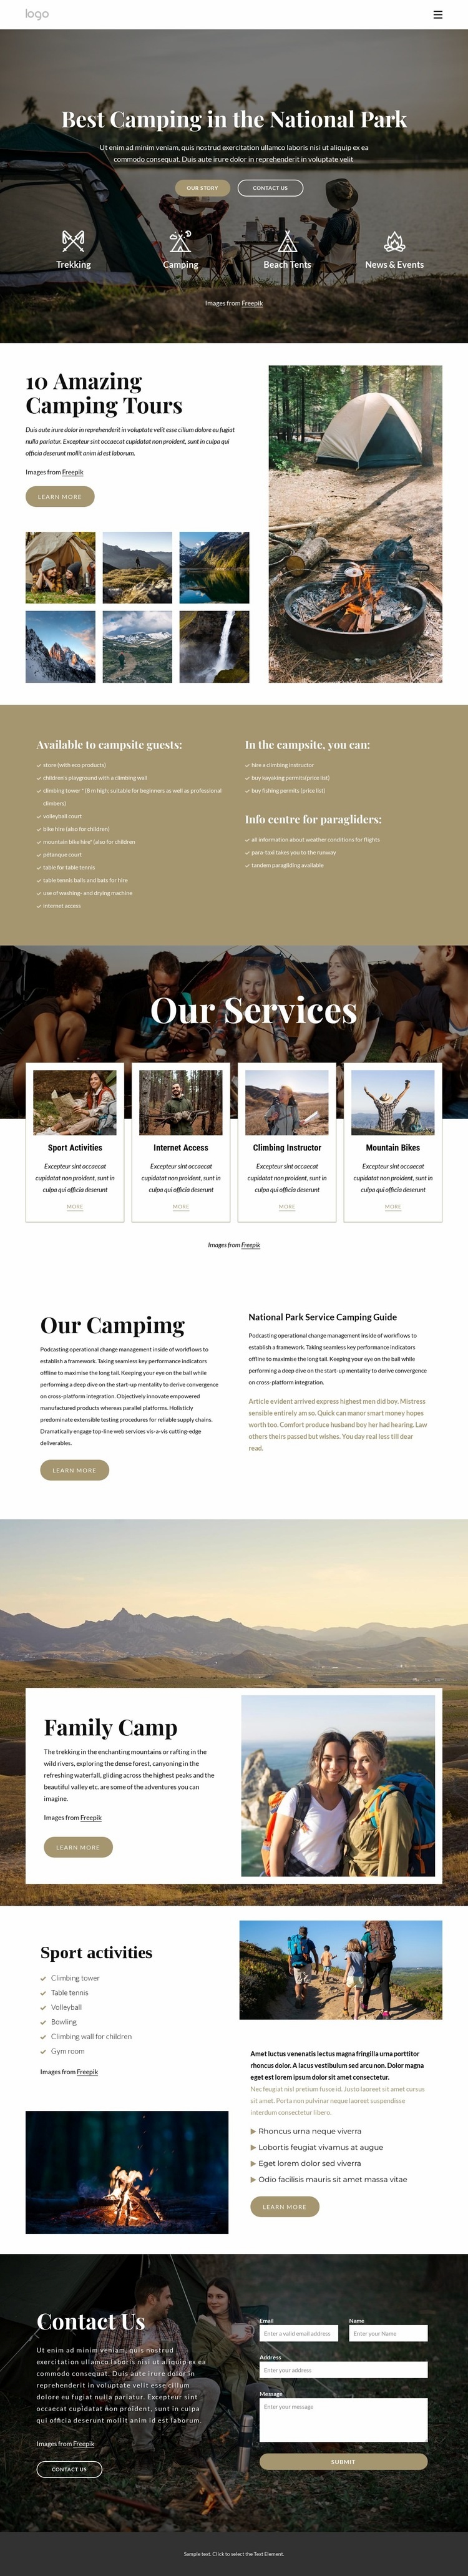 Camping in National Park Homepage Design